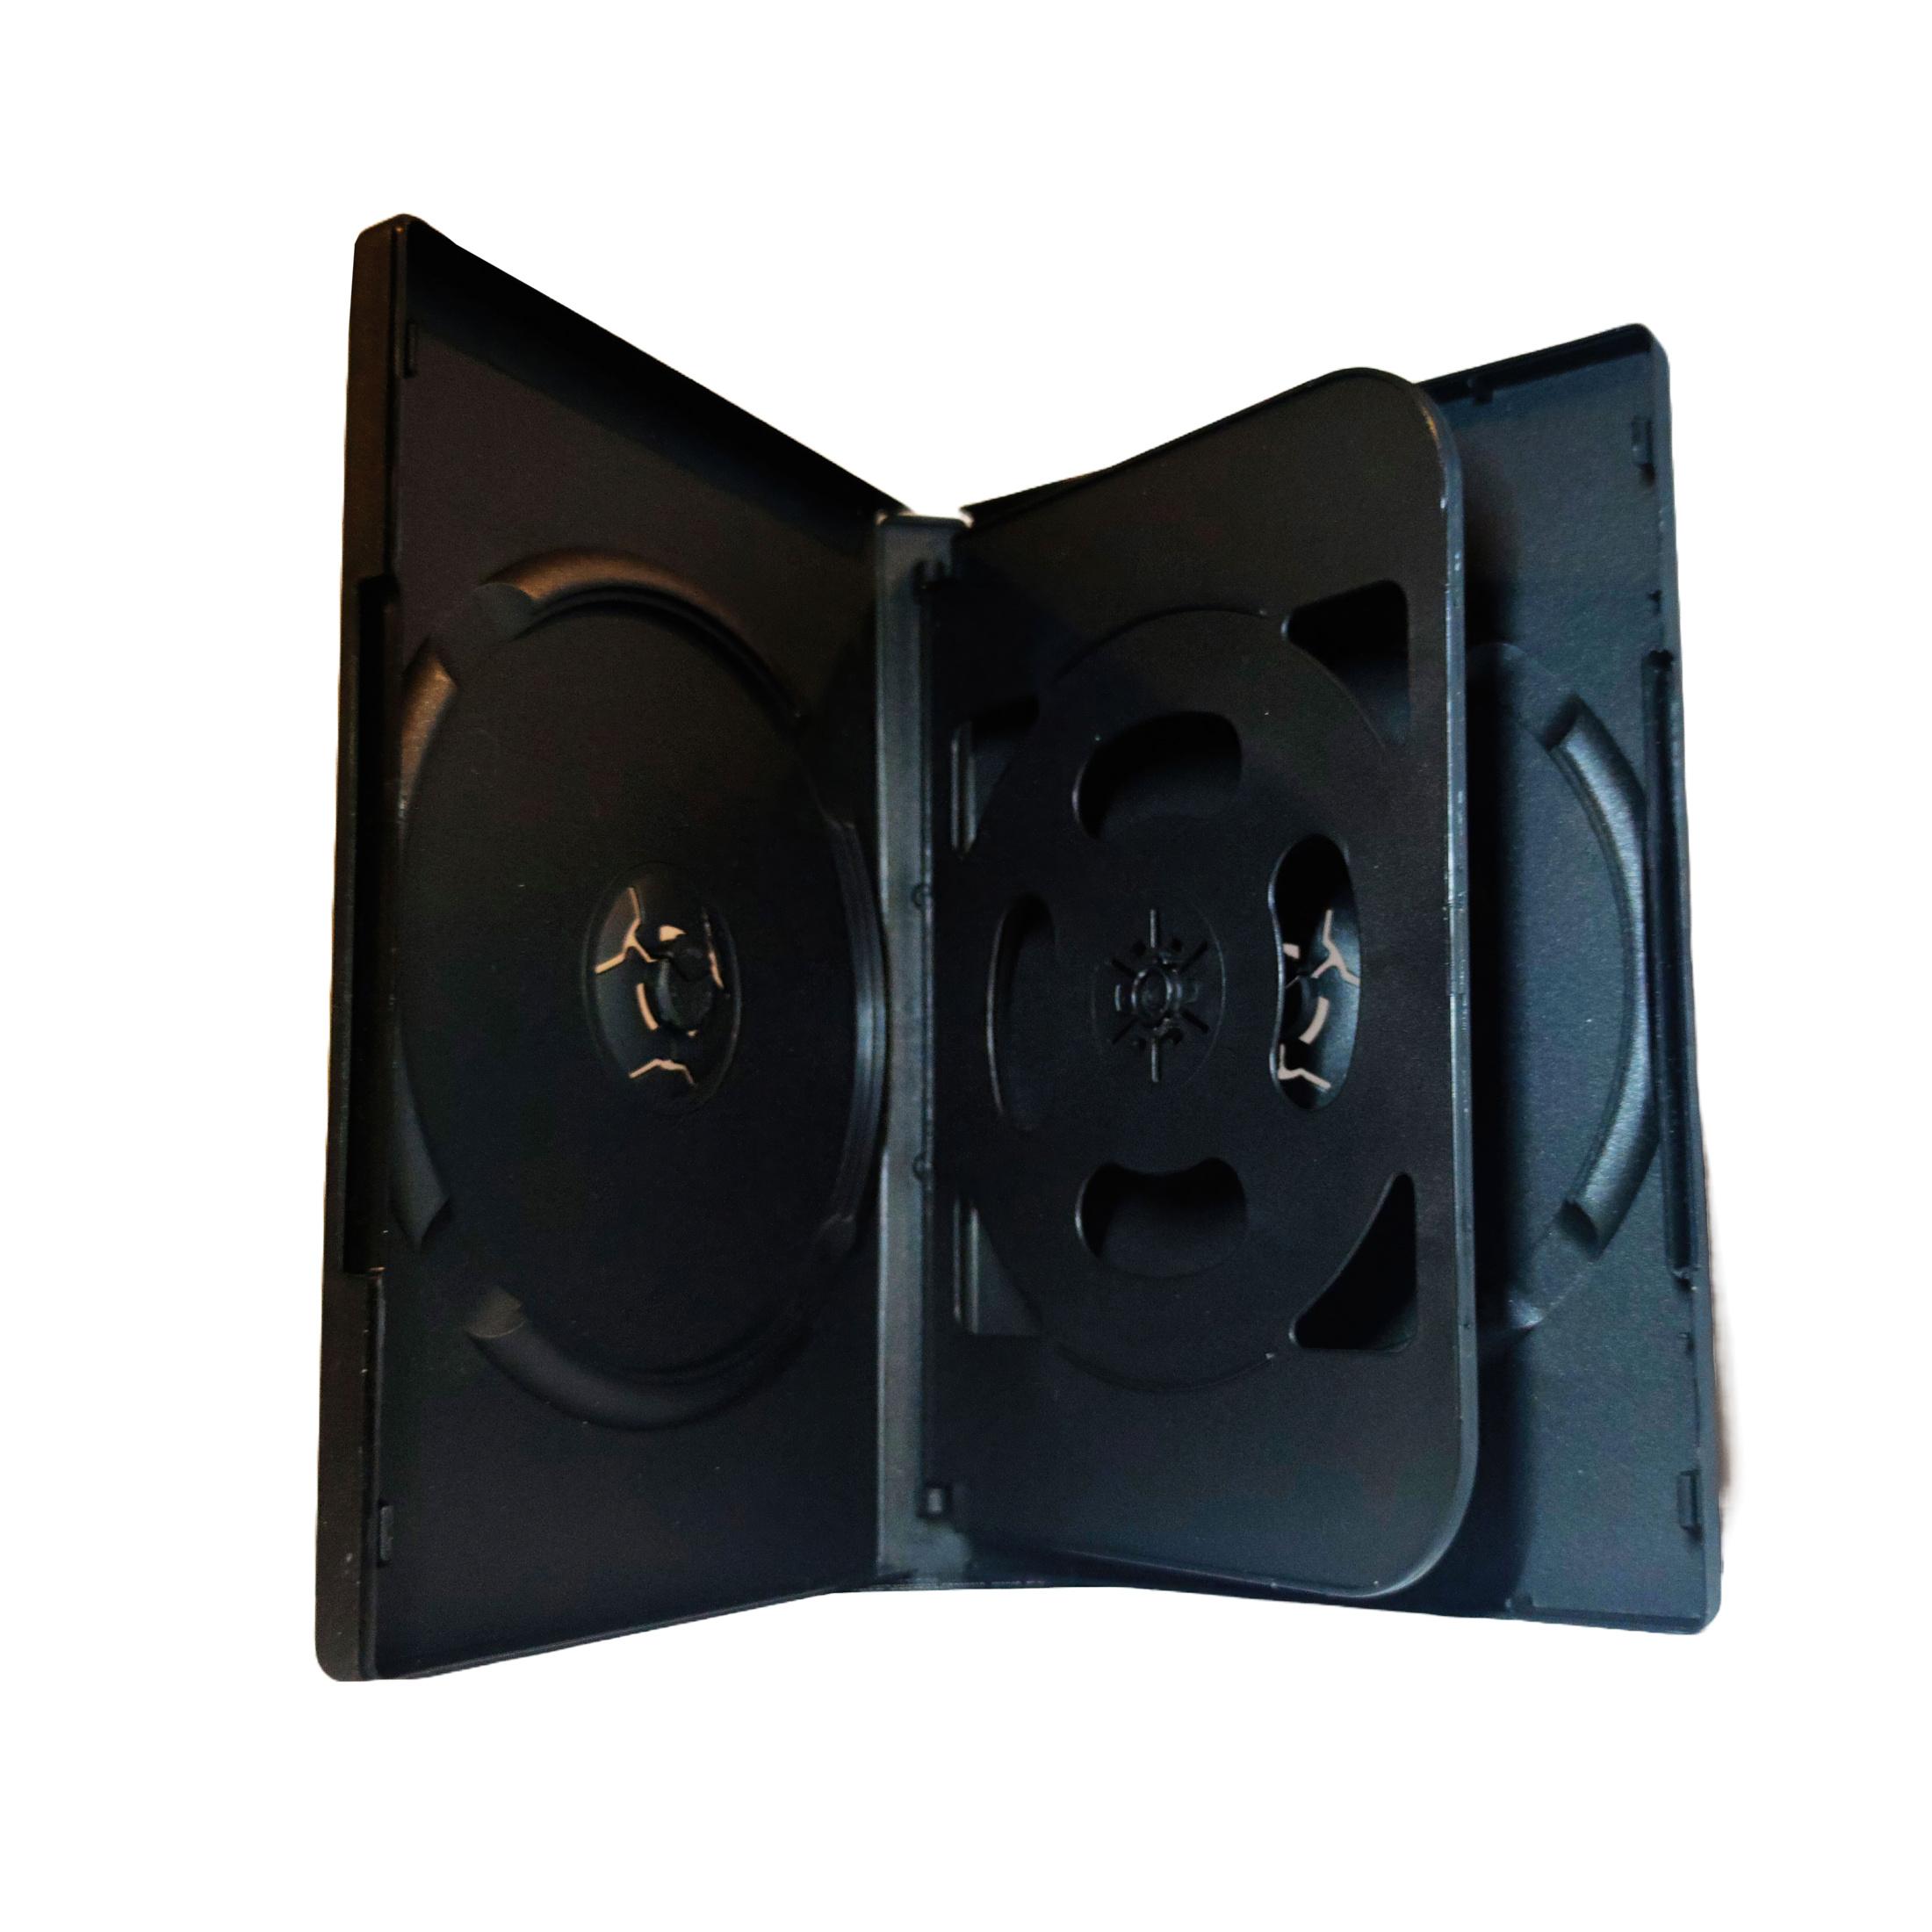 COVER IT Box: 4 DVD 19mm Black - Pack of 40